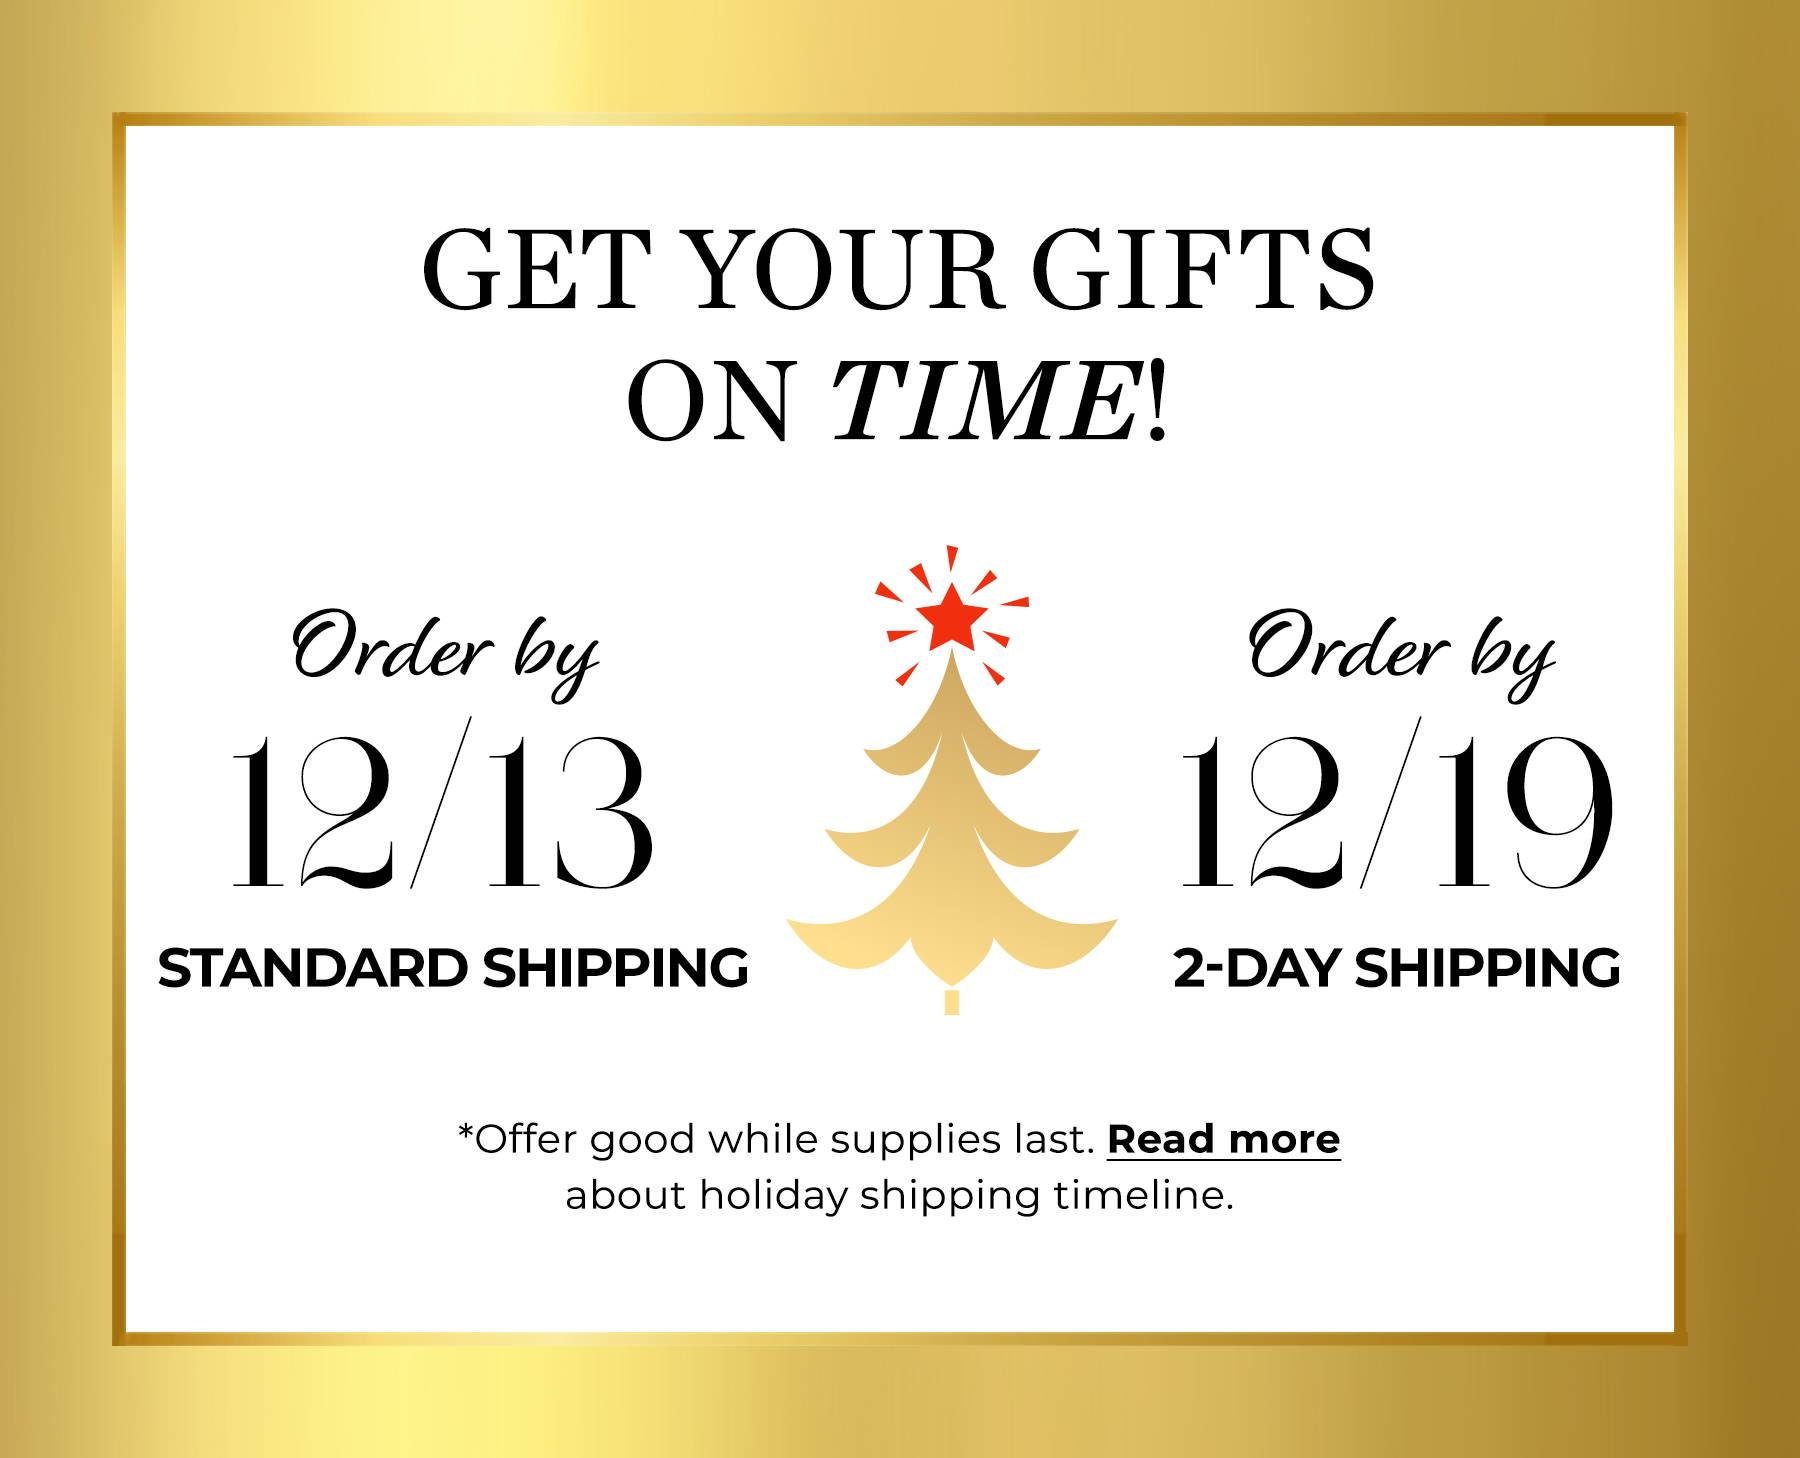 Get Your Gifts On Time! Order by 12/14 for standard shipping, 12/19 2-Day Shipping, 12/X next day shipping